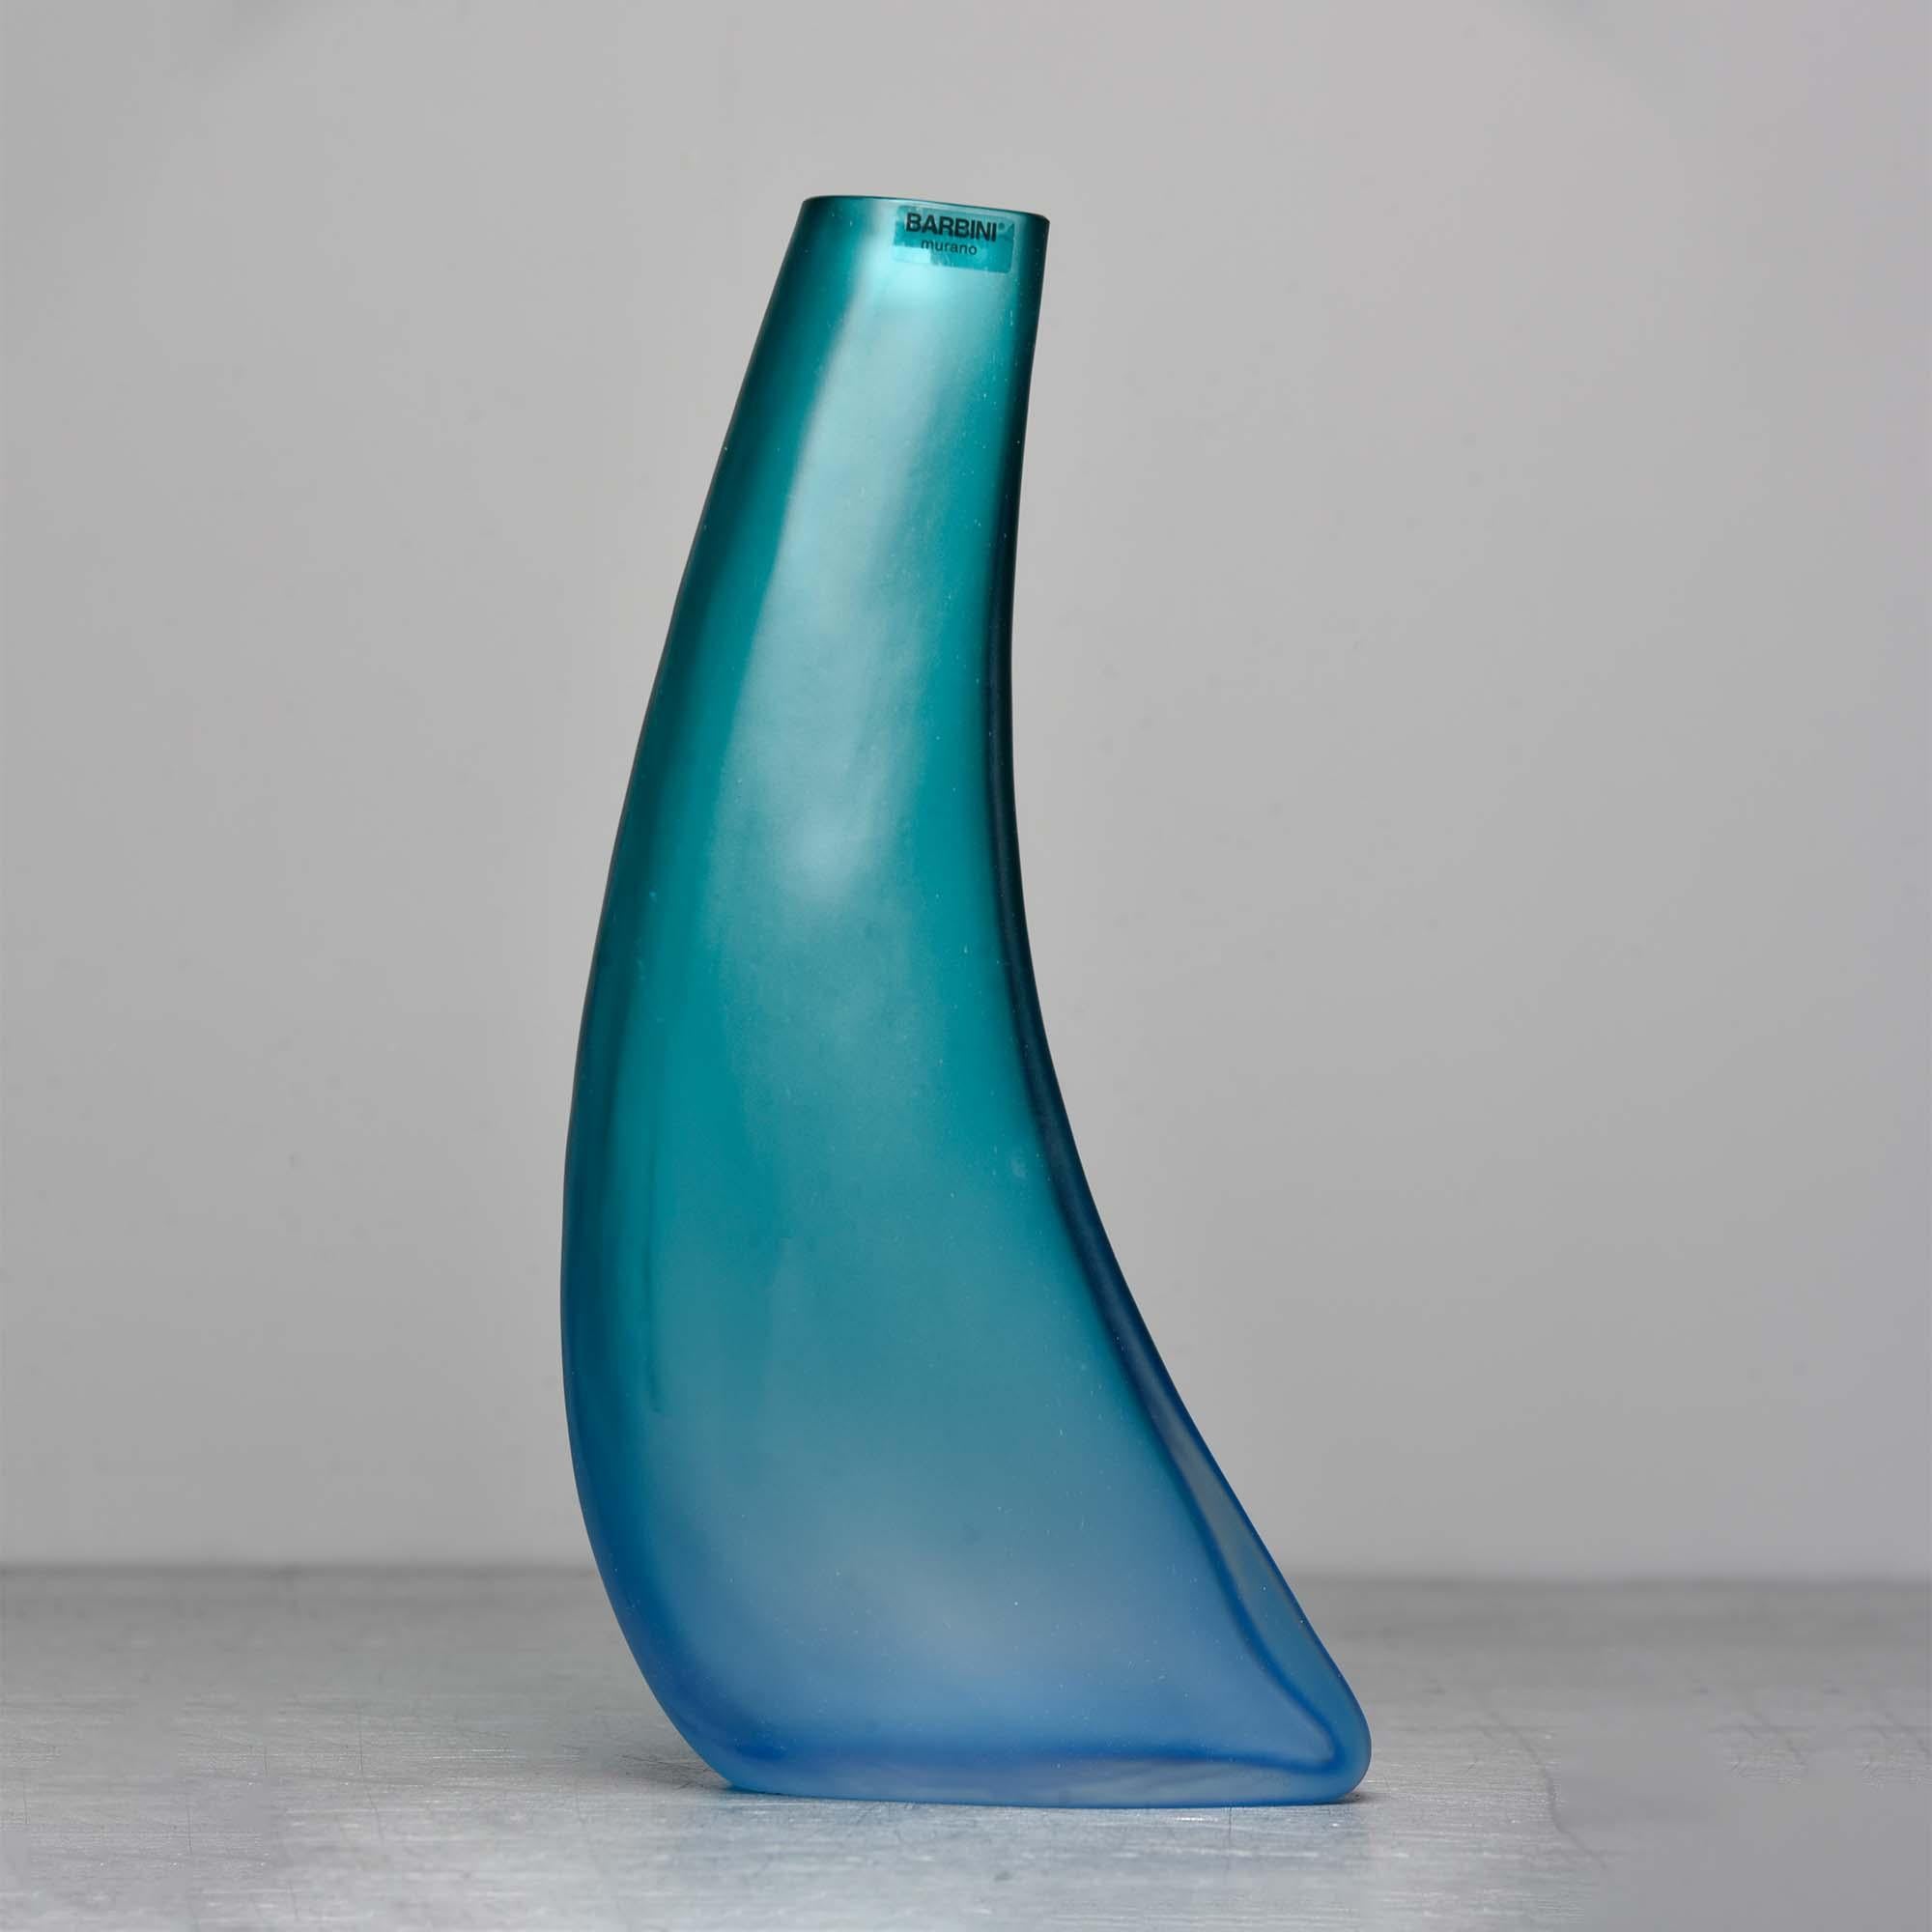 Circa 2010 Barbini of Murano tall, curved glass vase in ombre style that transitions from Caribbean sea green at top to sky blue at base. Original label affixed and signature is etched on base. Unused condition.